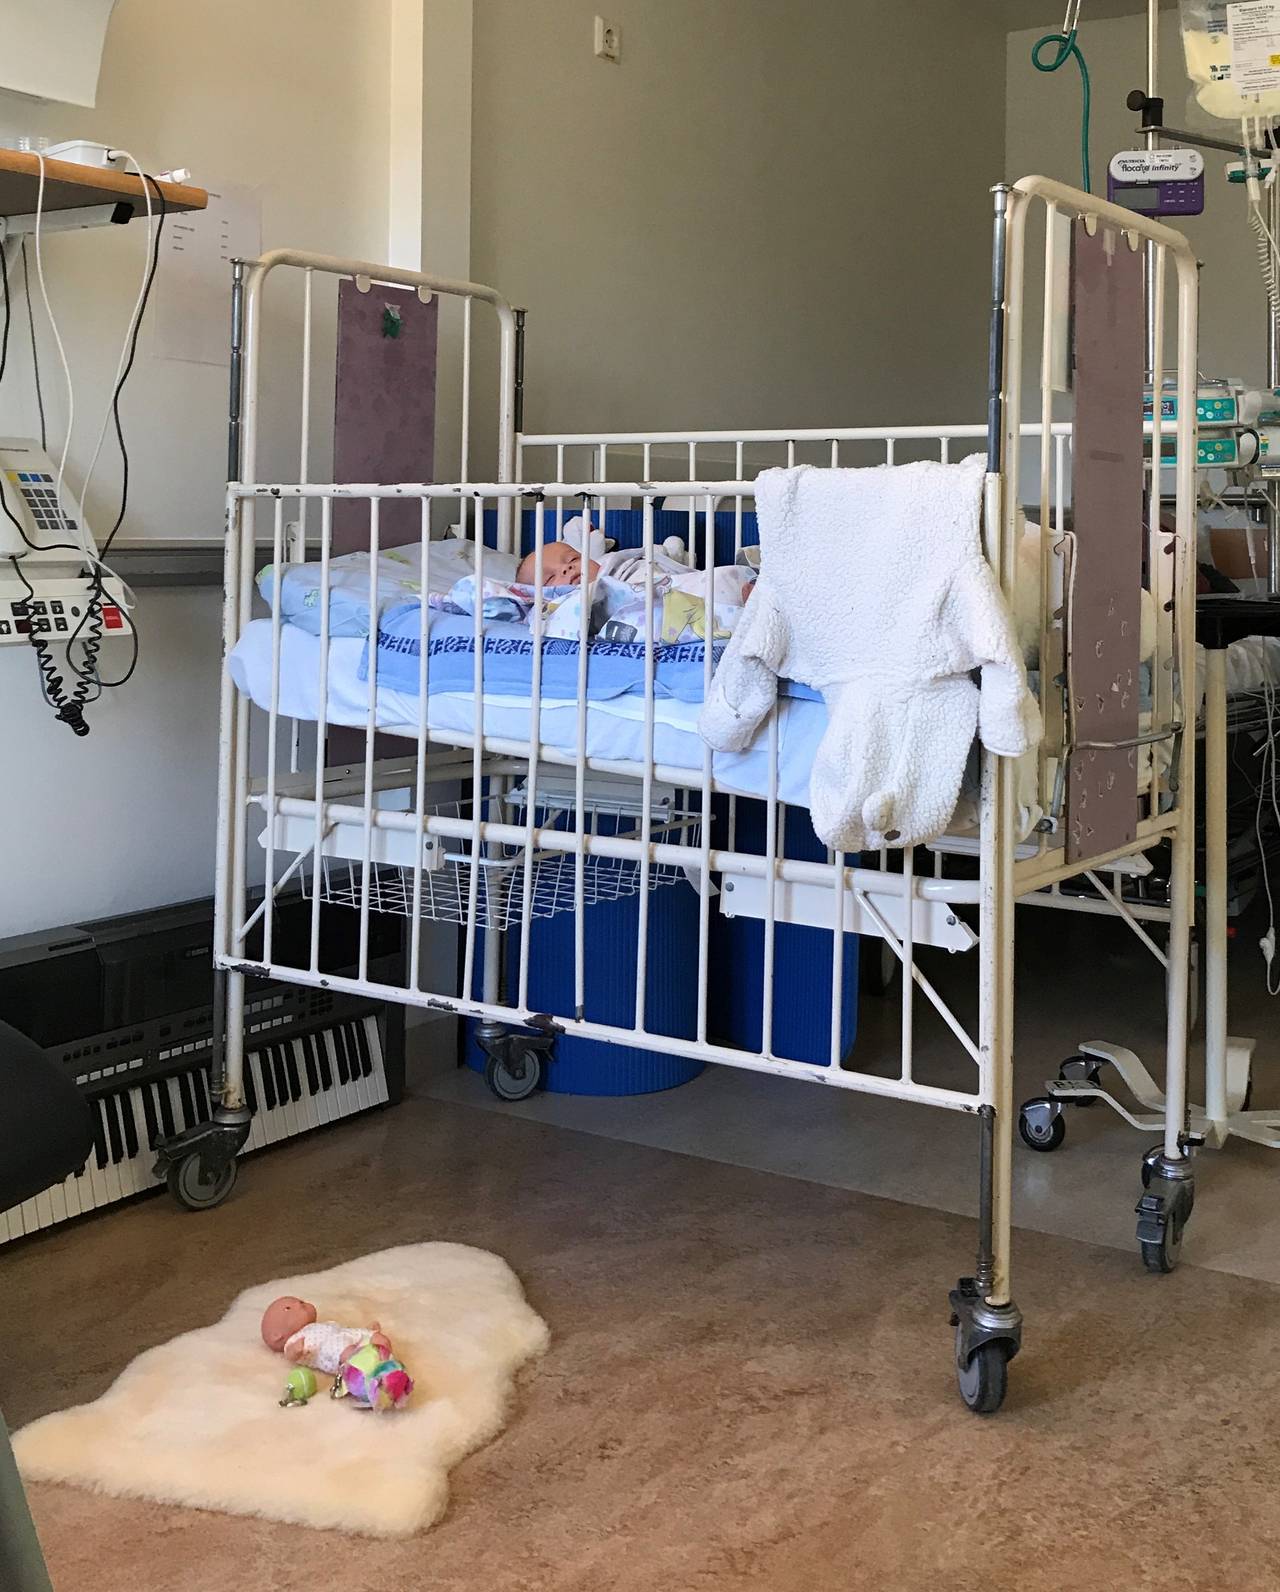 Sonia Victoria in her hospital bed.  The doll on the floor is the only thing that indicates that the room belongs to a child.